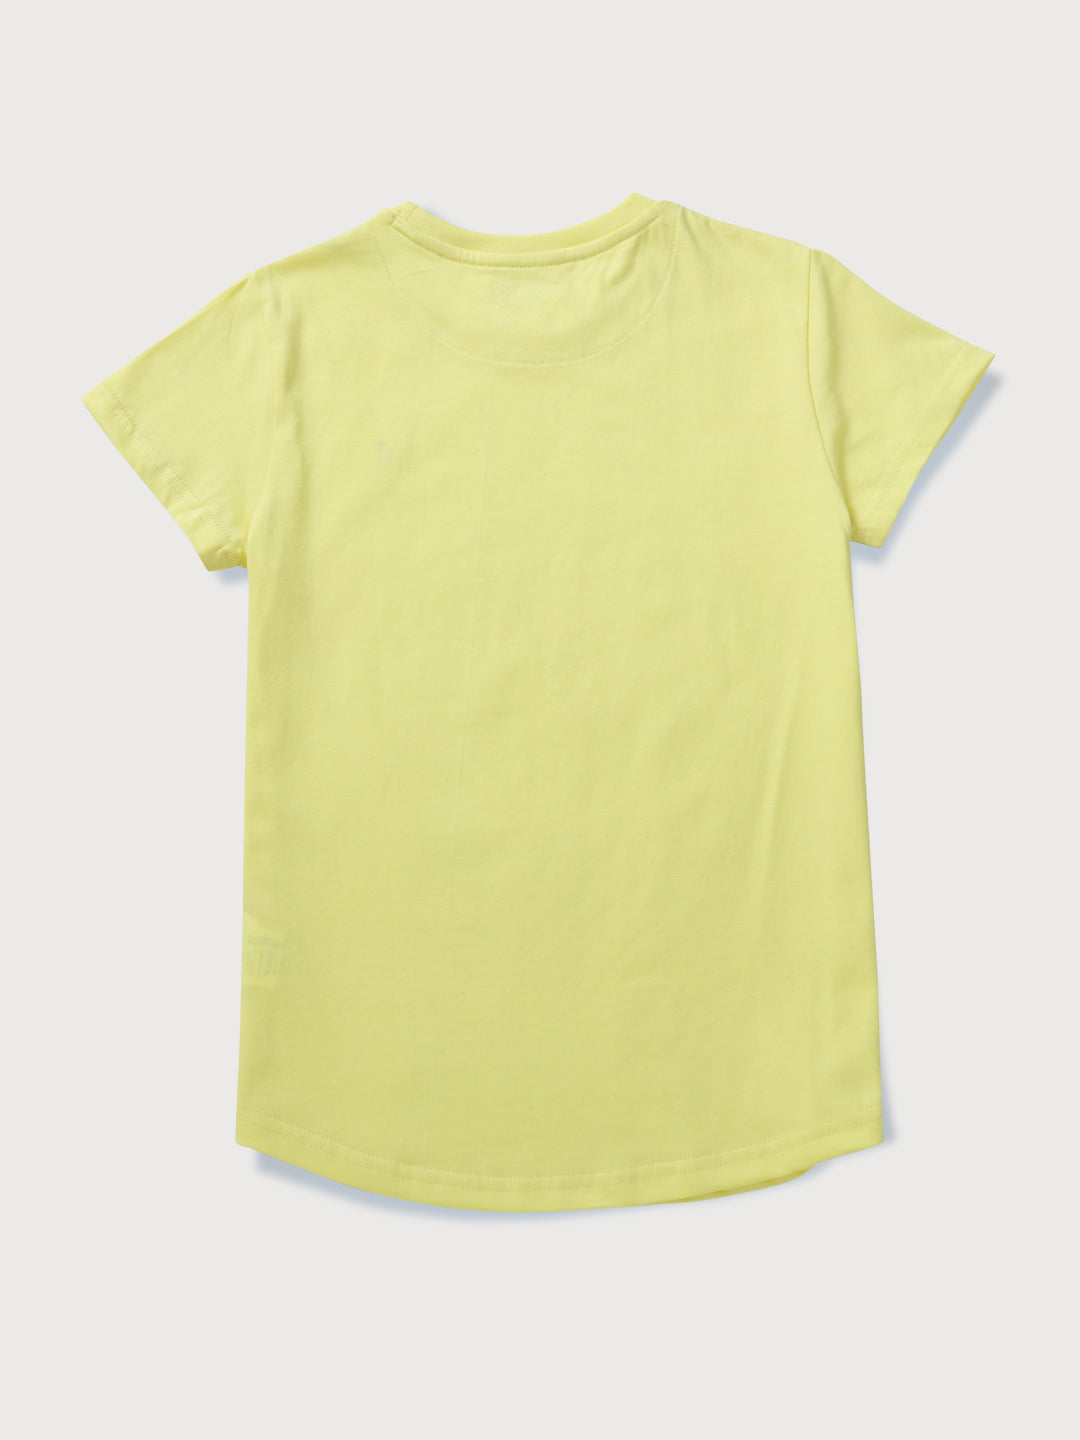 Girls Yellow Solid Cotton Knits Top